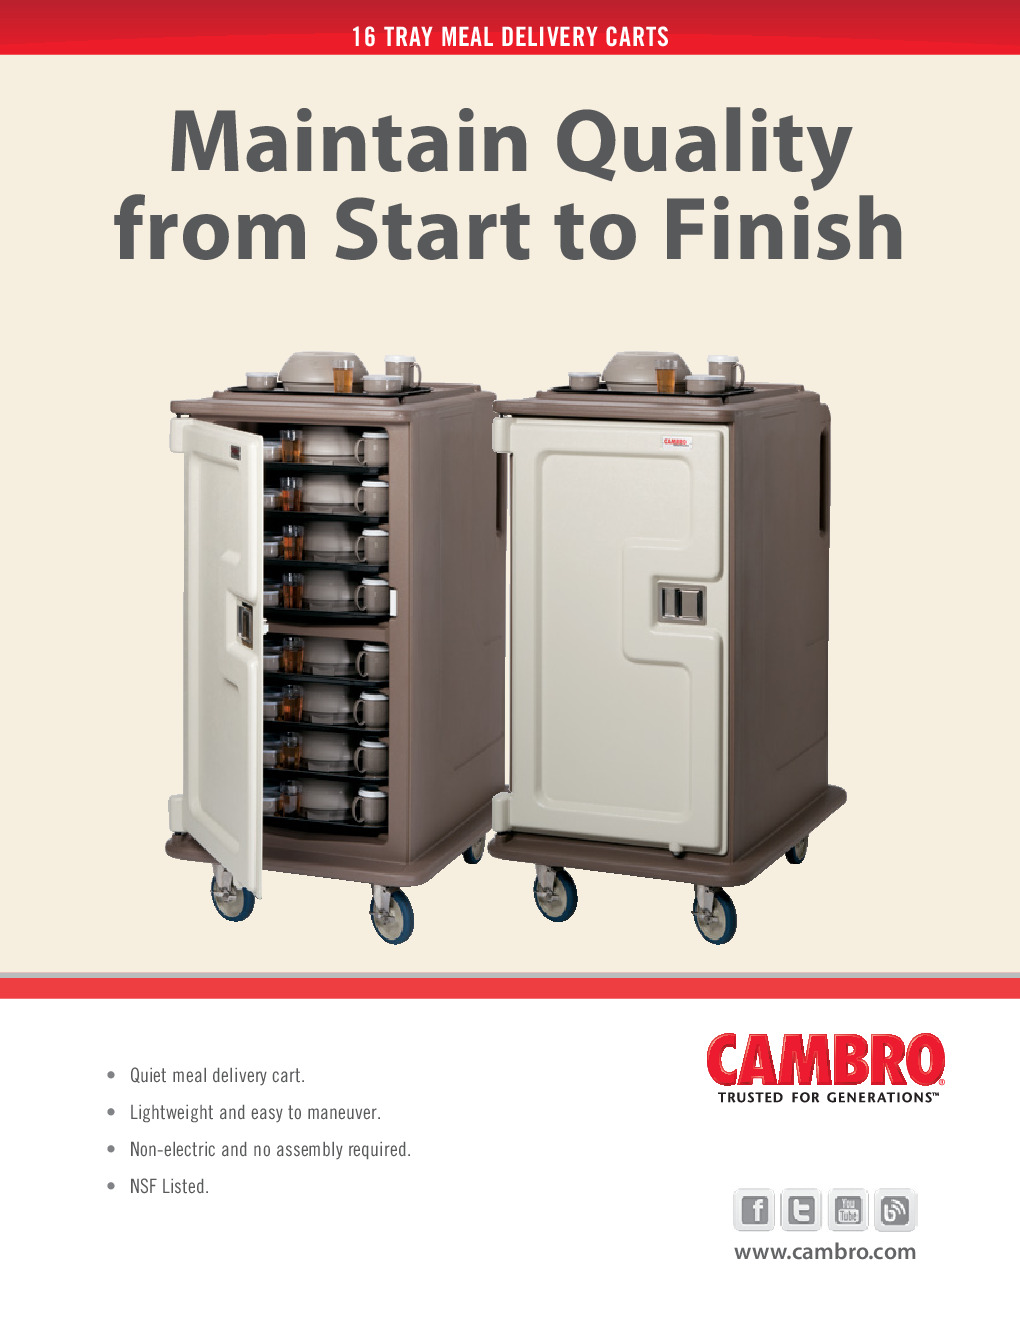 Cambro MDC1418T16194 Meal Tray Delivery Cabinet